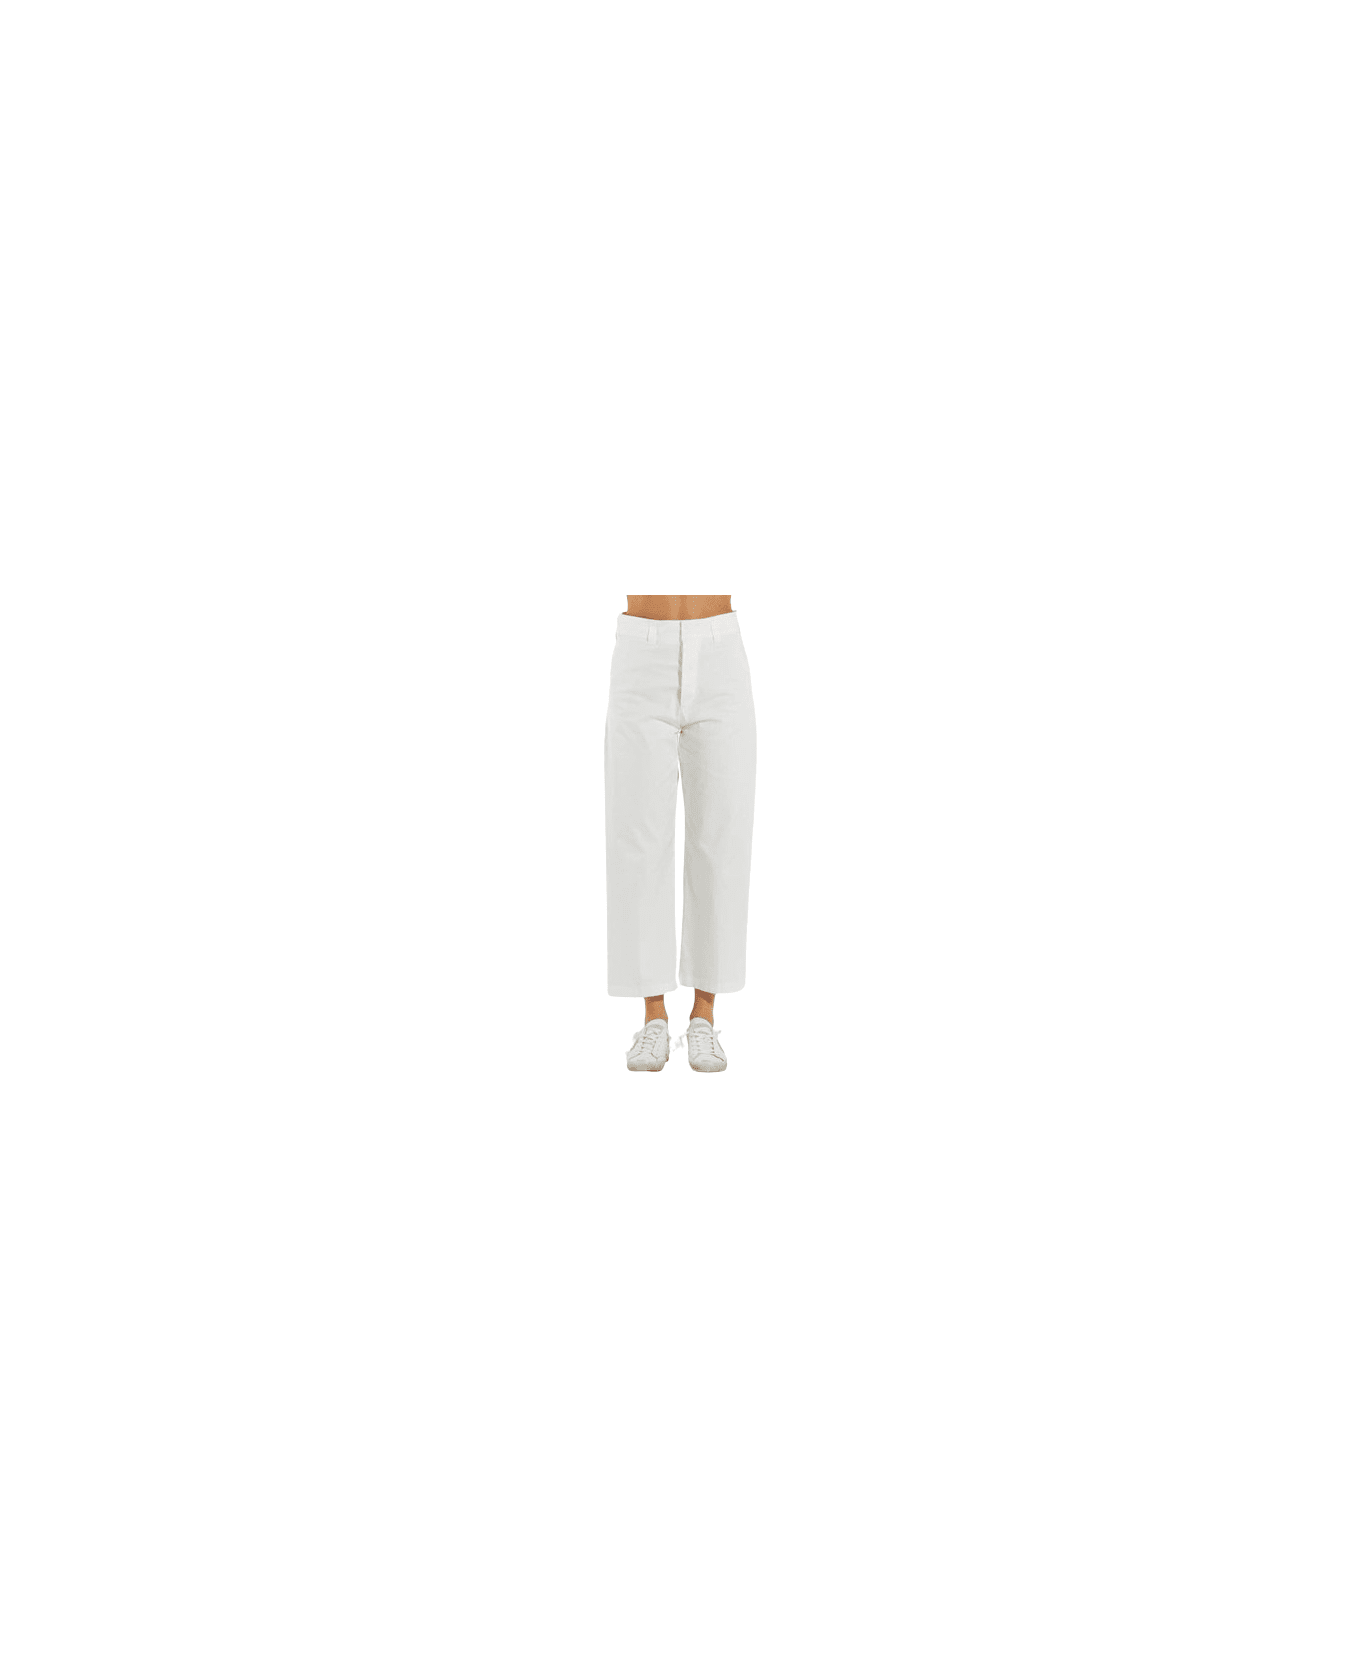 Department Five Trousers - Bianco ボトムス